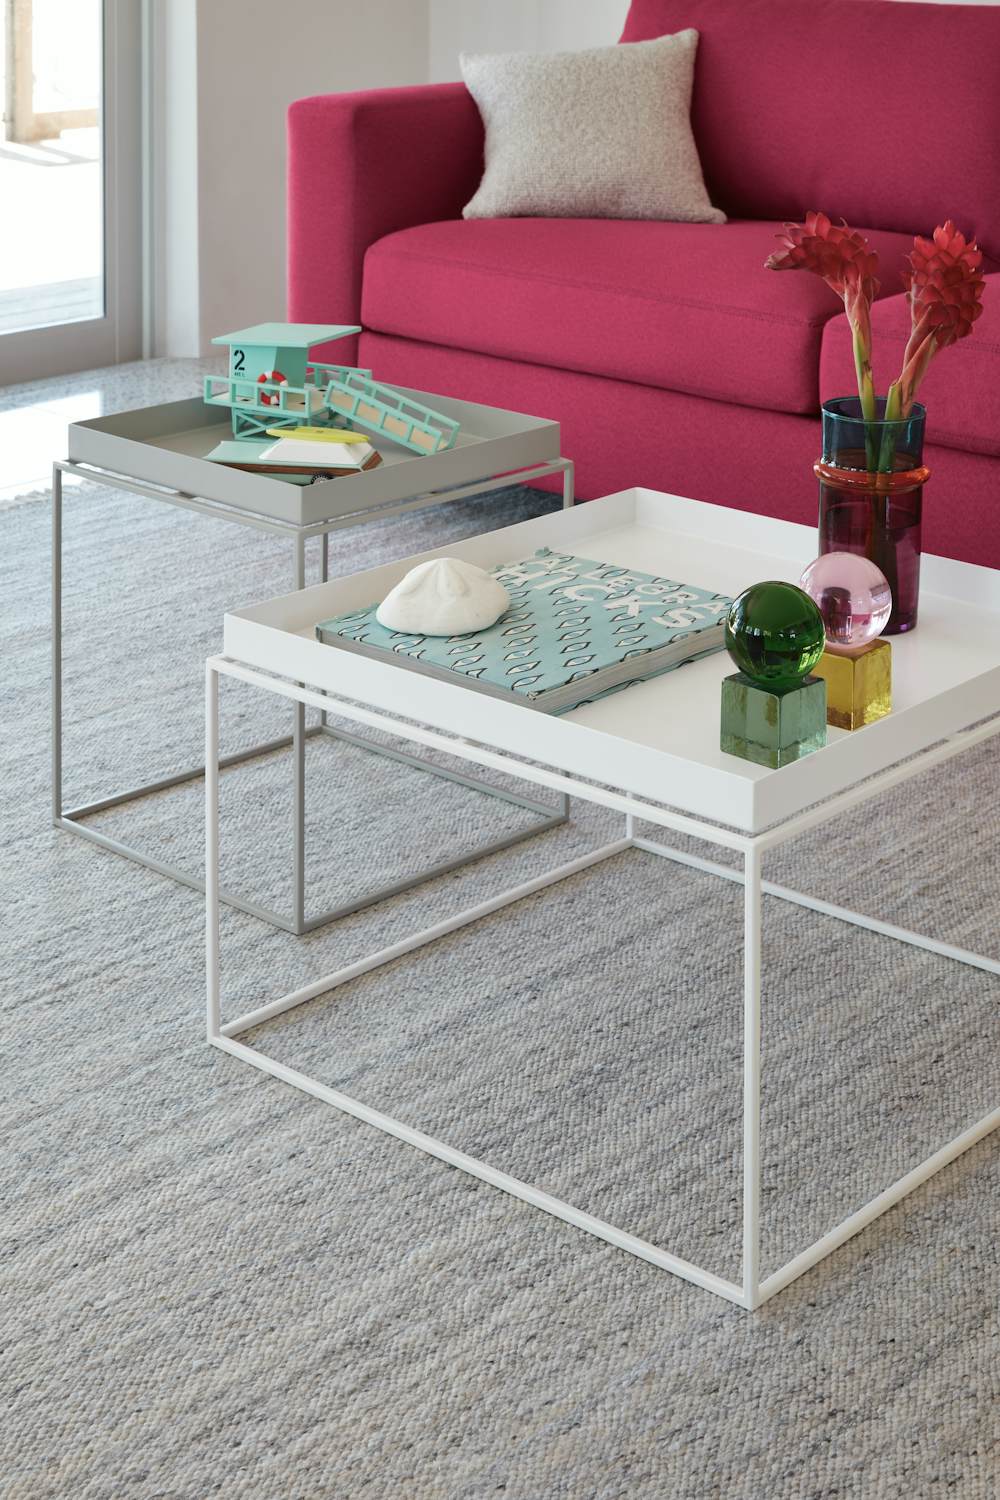 Tray Side Table Medium in a living room setting